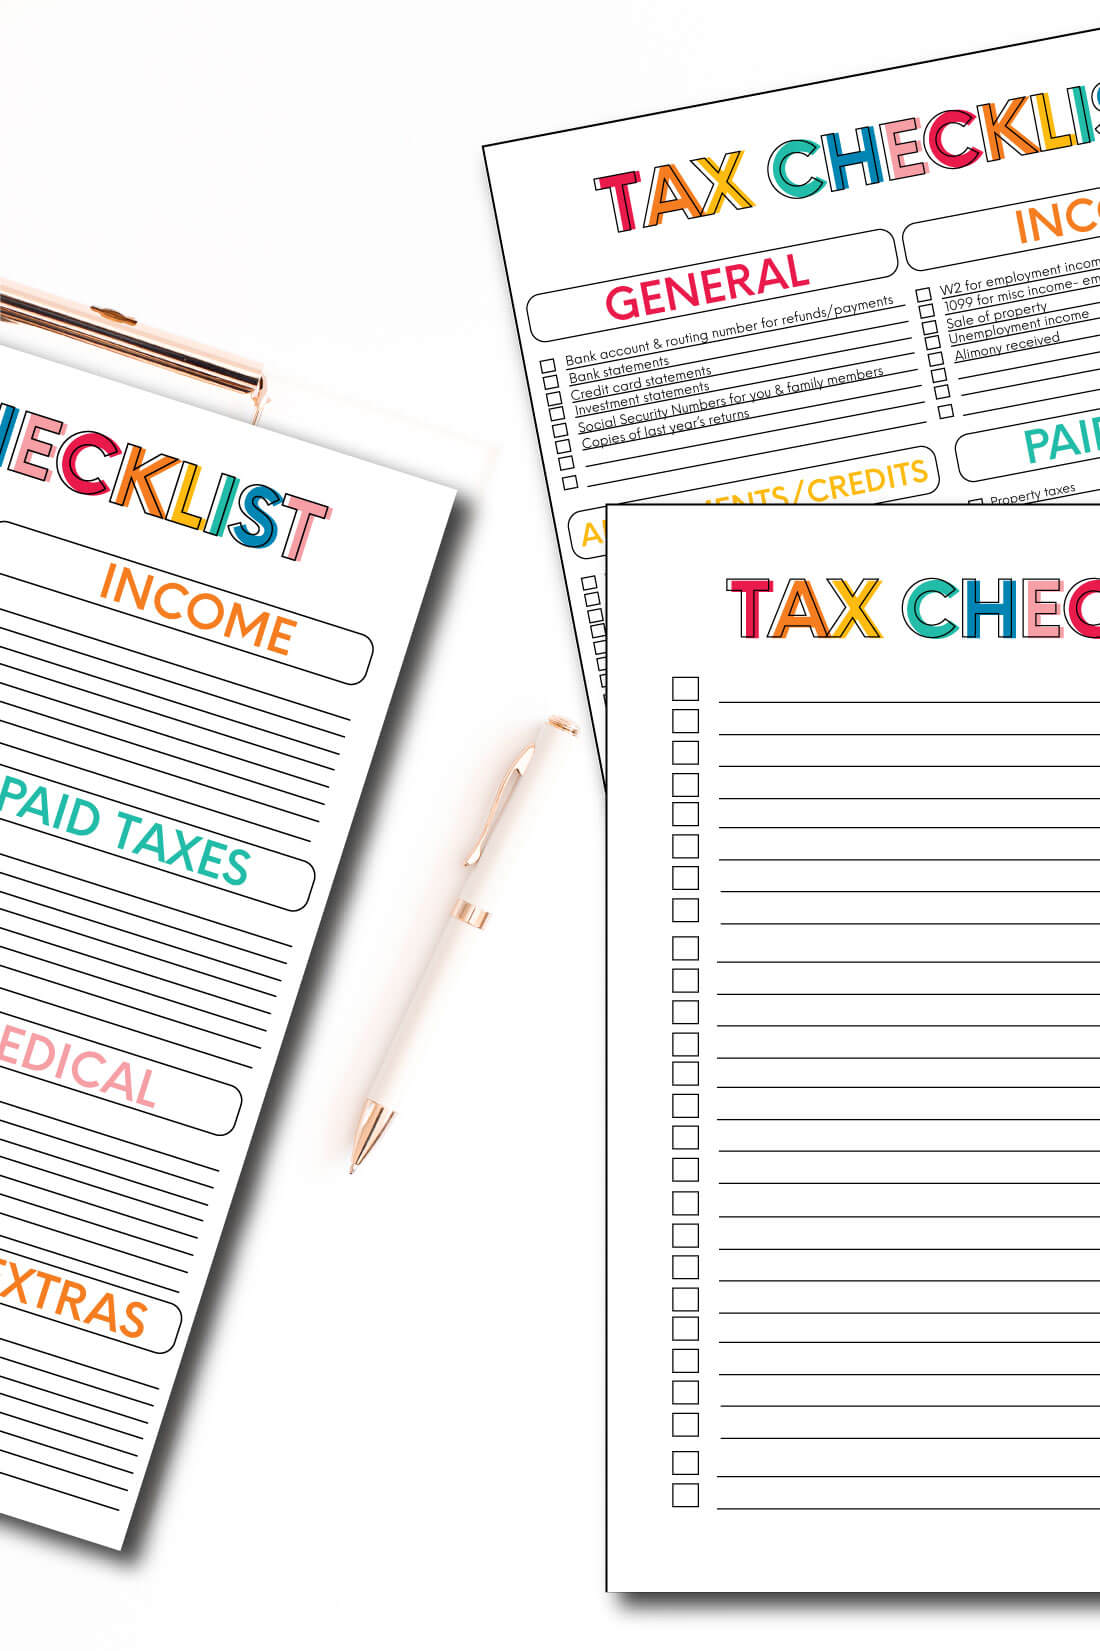 Printable Tax Forms - use these forms to keep track for taxes